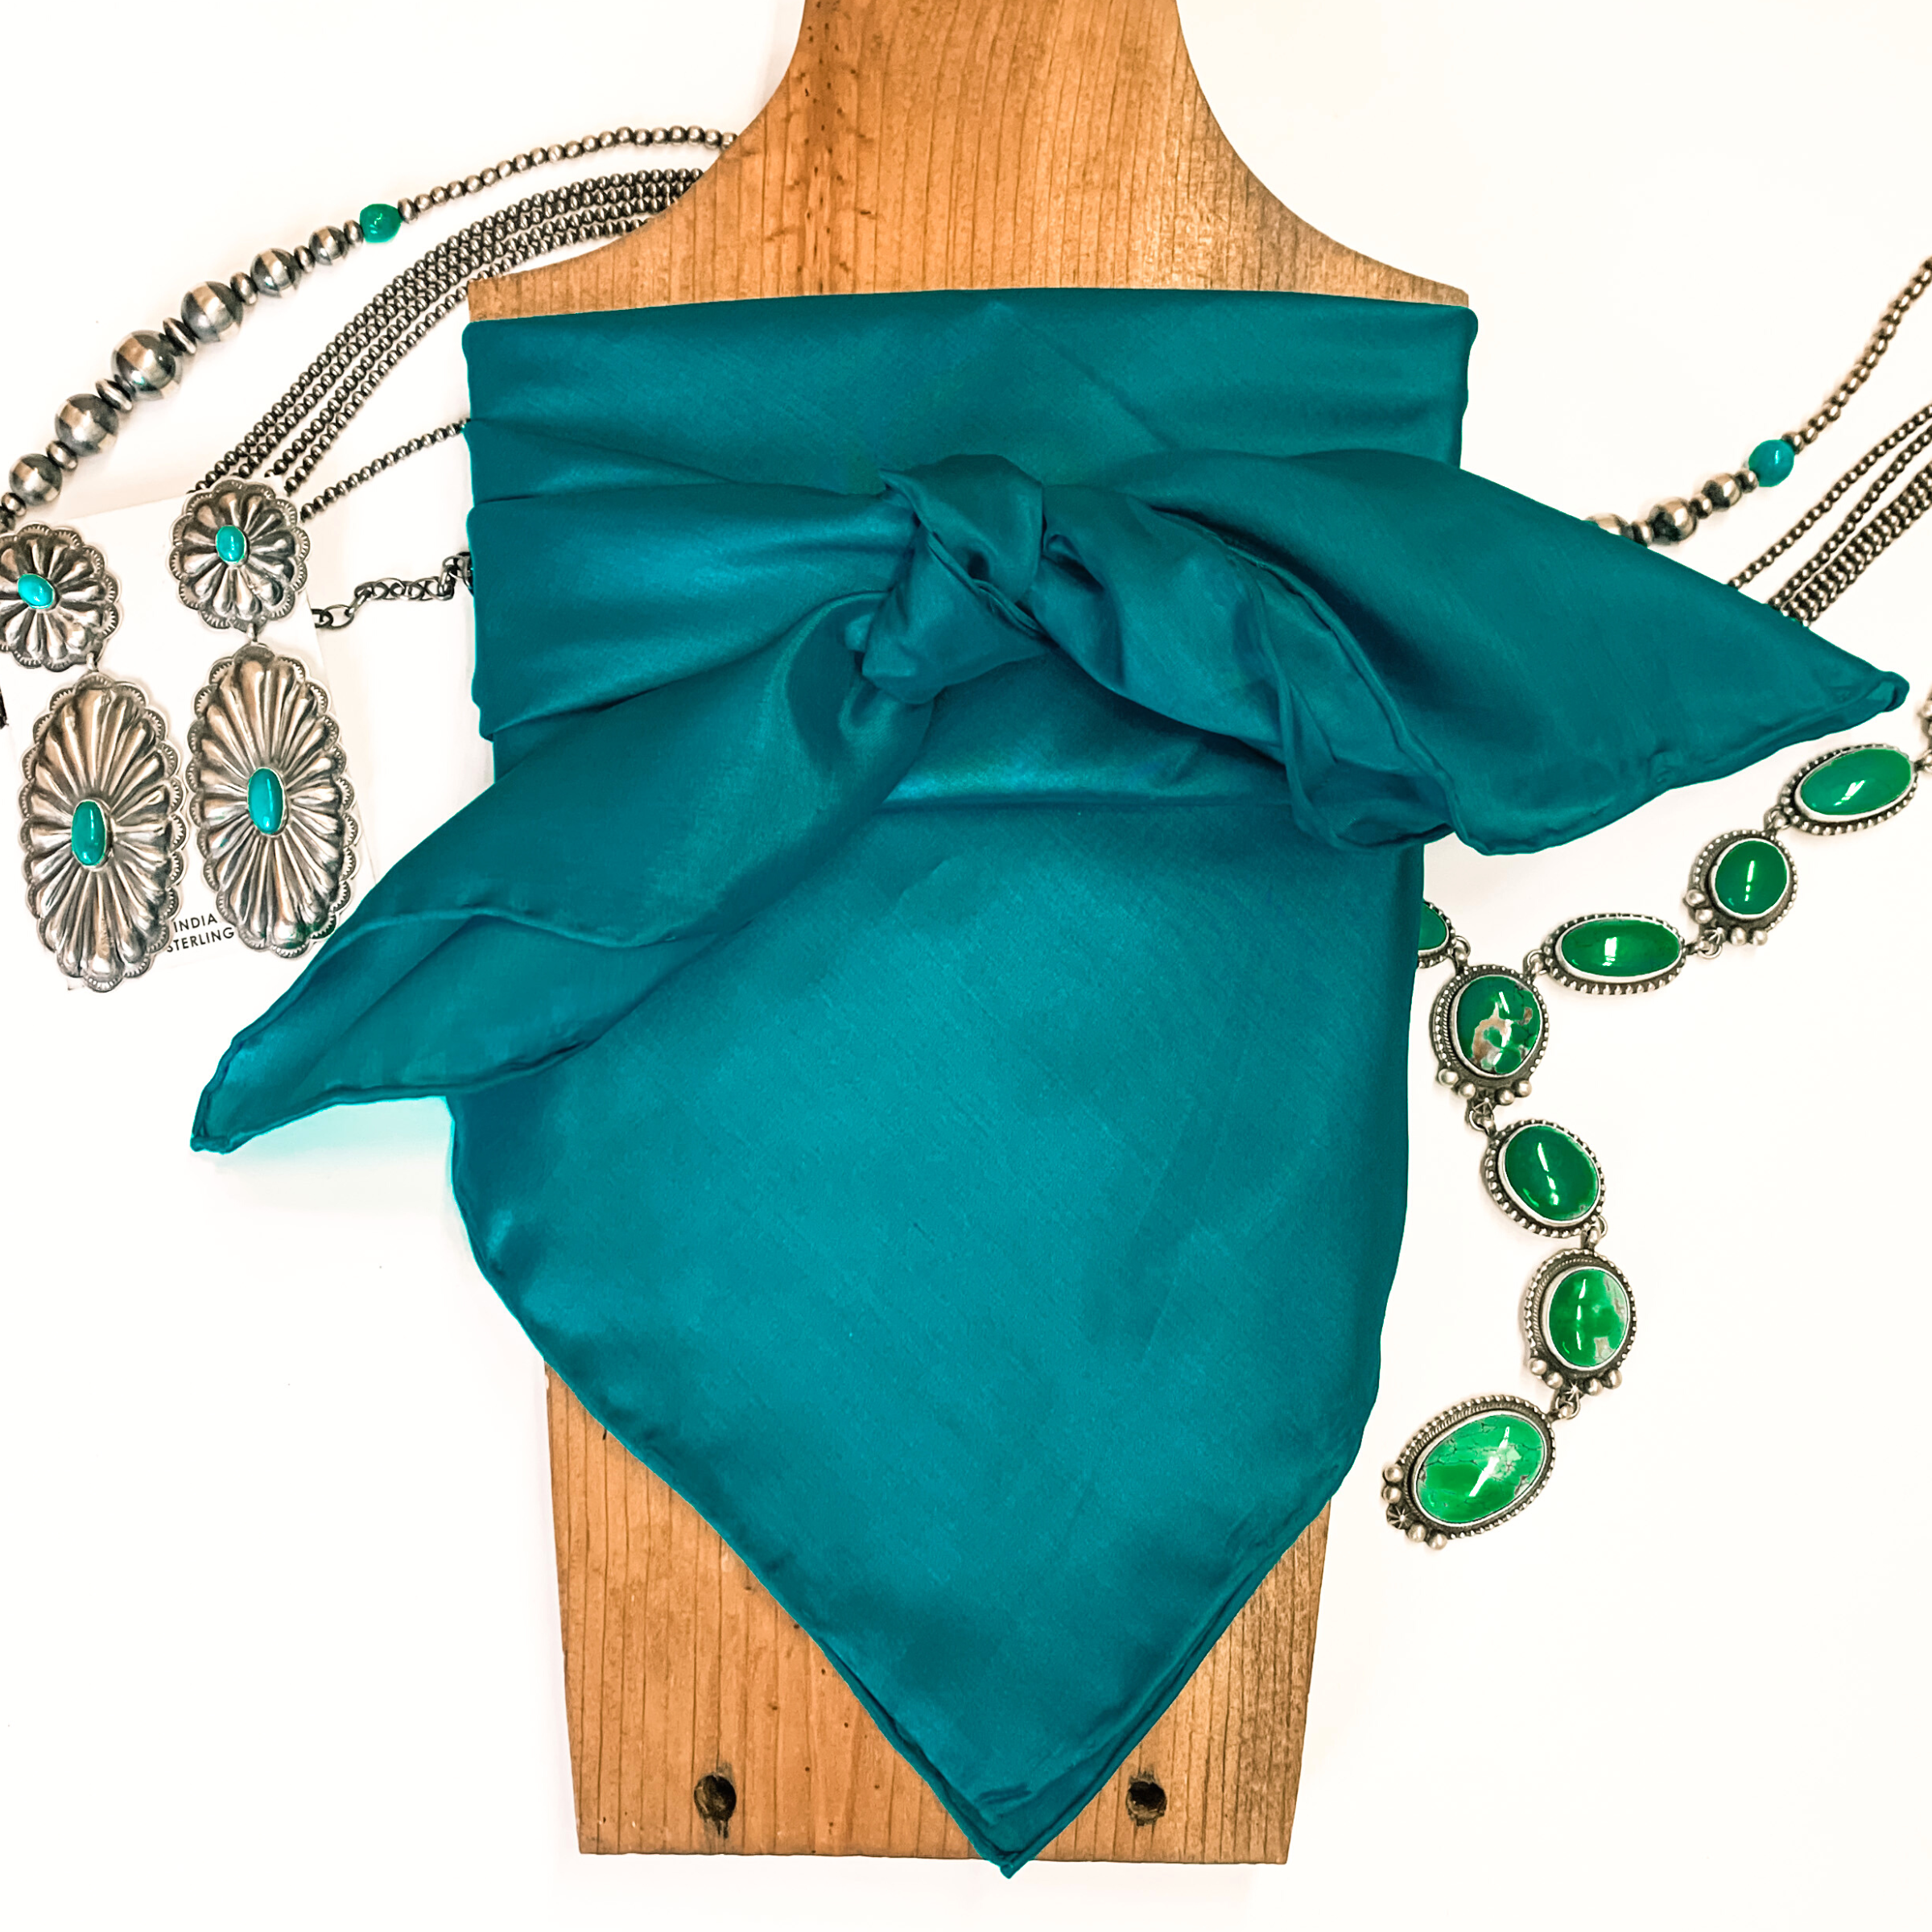 This is a aqua silk wild rag, this wild rag is pictured wrapped around a brown necklace board. This wild rag is pictured on a white background and with silver and turquoise Navajo jewelry behind it as decoration.